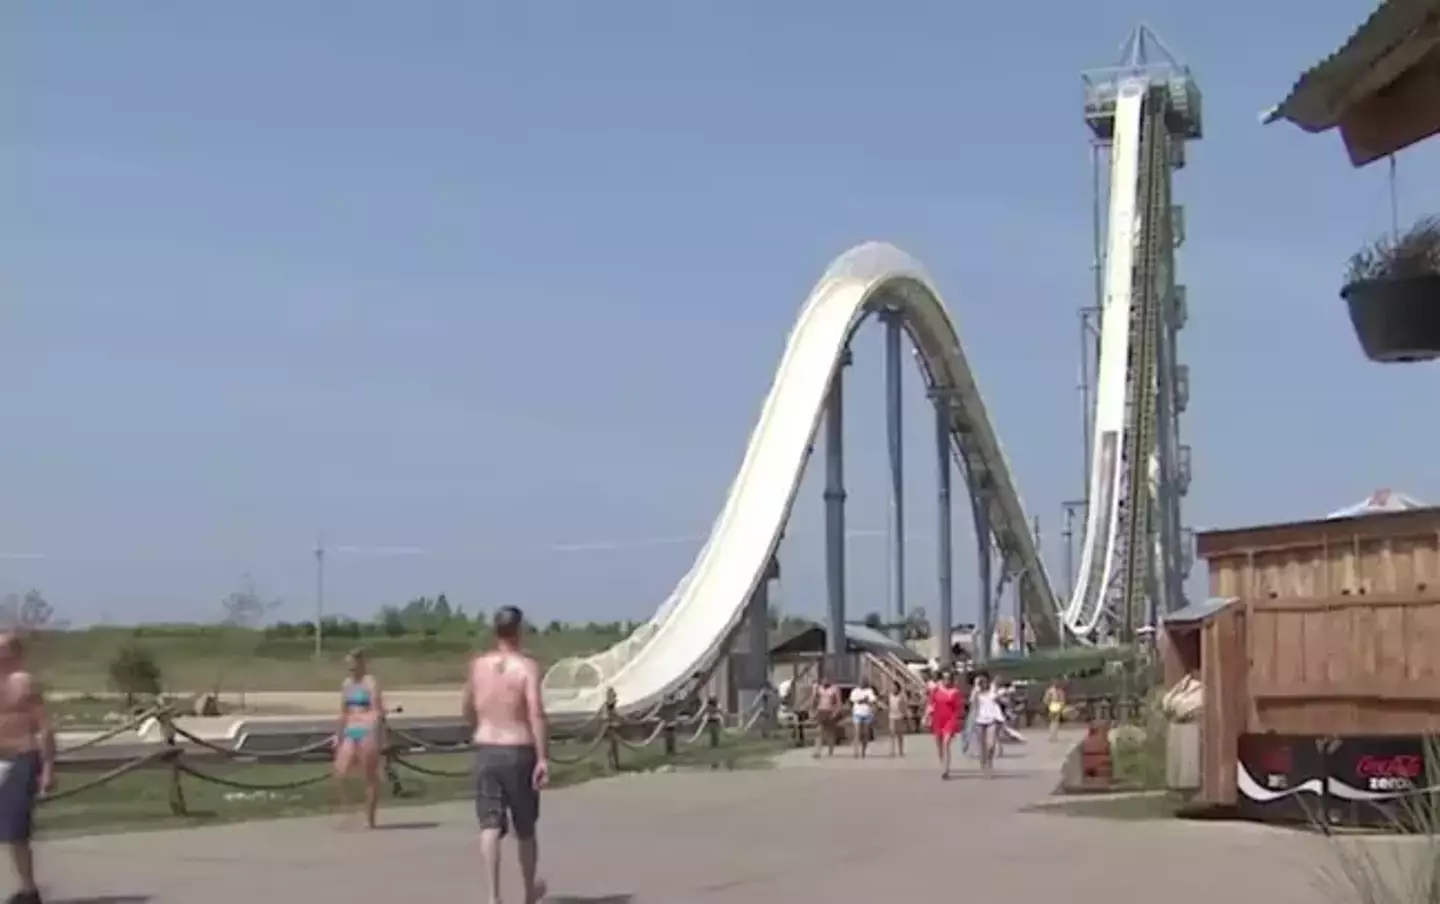 The waterslide was closed after Caleb's death and later demolished.